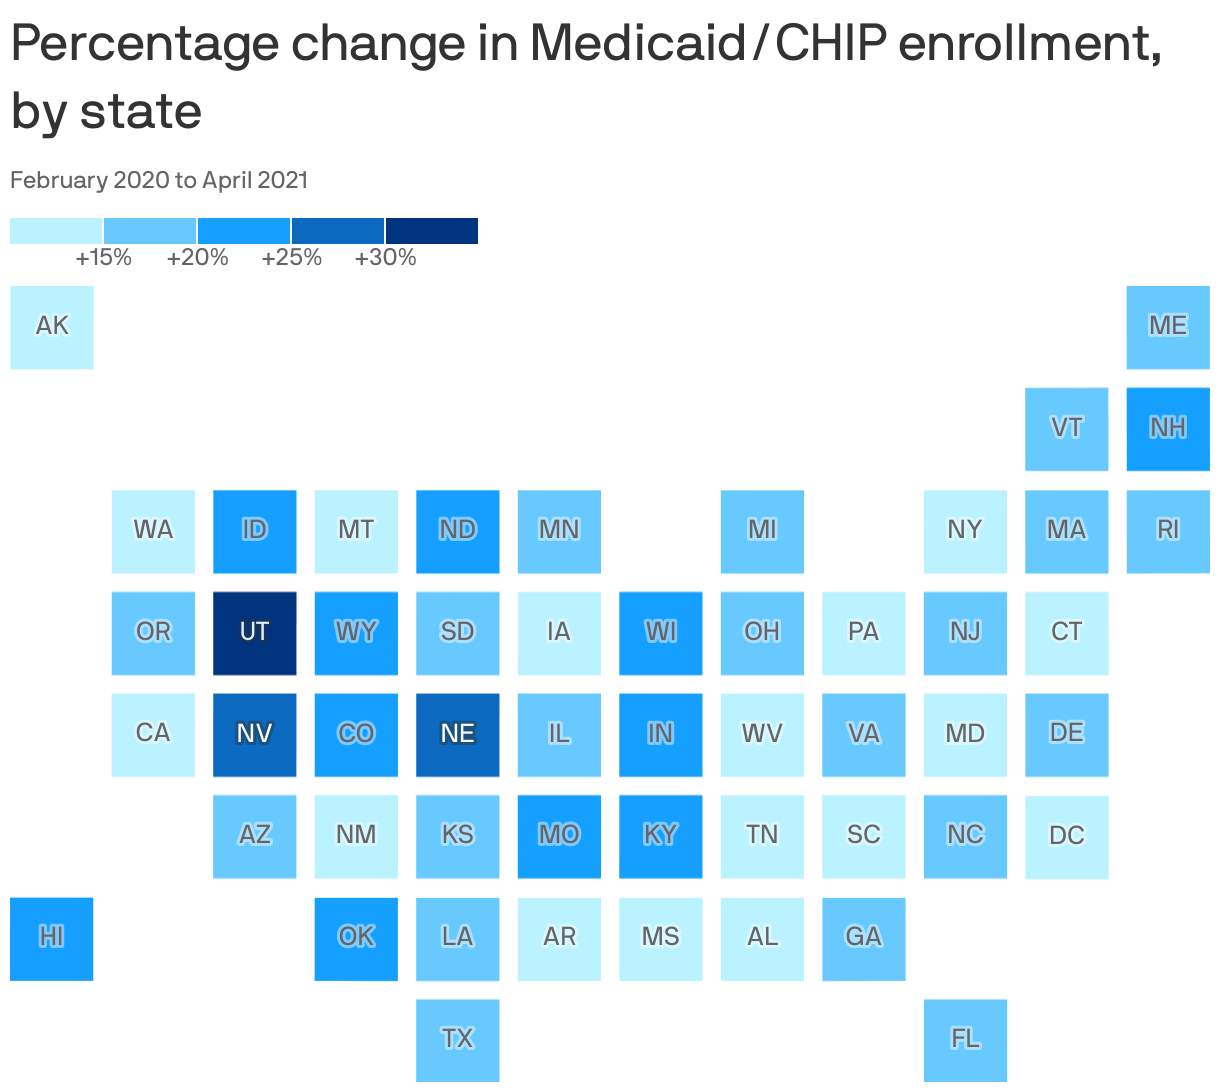 Percentage change in Medicaid/CHIP enrollment, by state